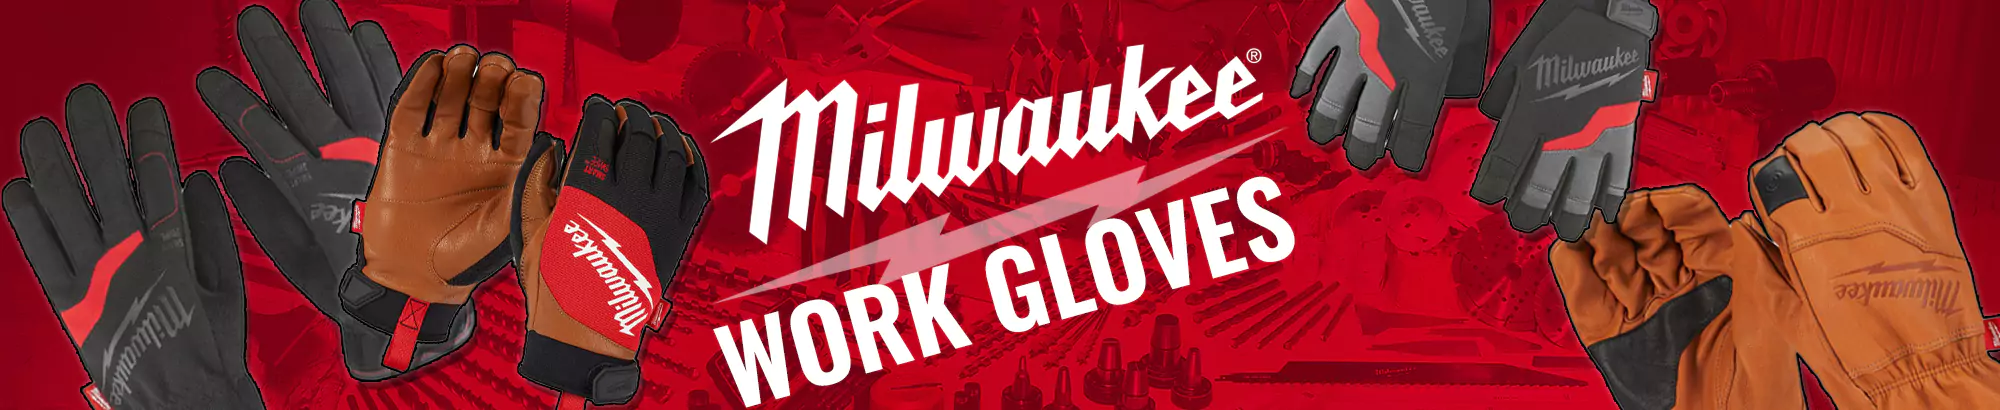 Banner showing Milwaukee Gloves on either side and milwaukee work gloves in text in the middle